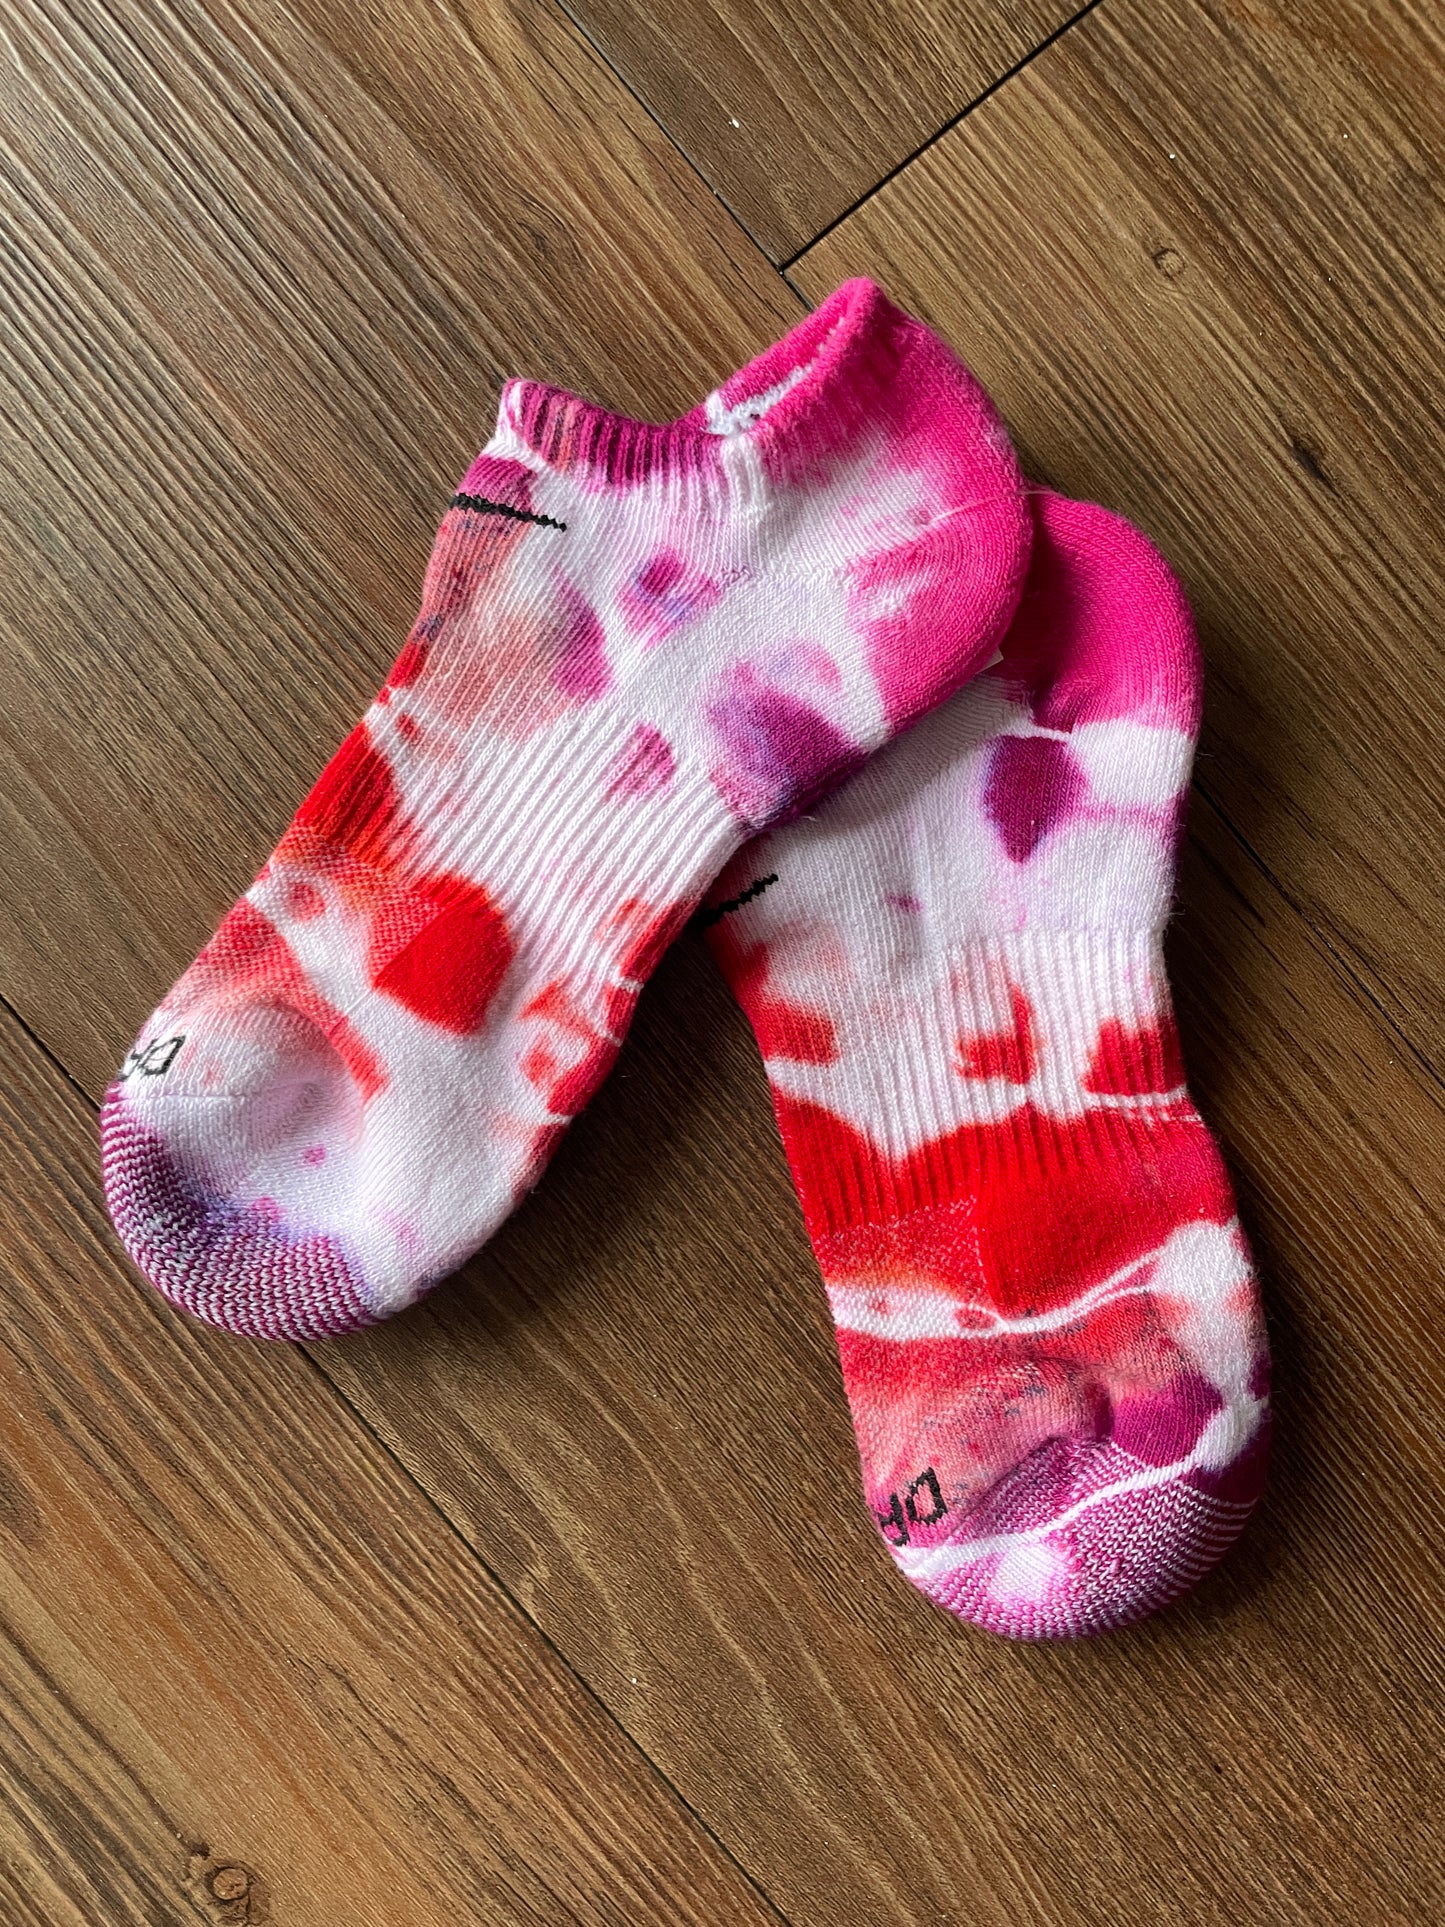 Red, Pink, and White Tie Dye Nike Dri-FIT Everyday Plus Ankle Socks - Size Medium (Men's 6-8/Women's 7-10)